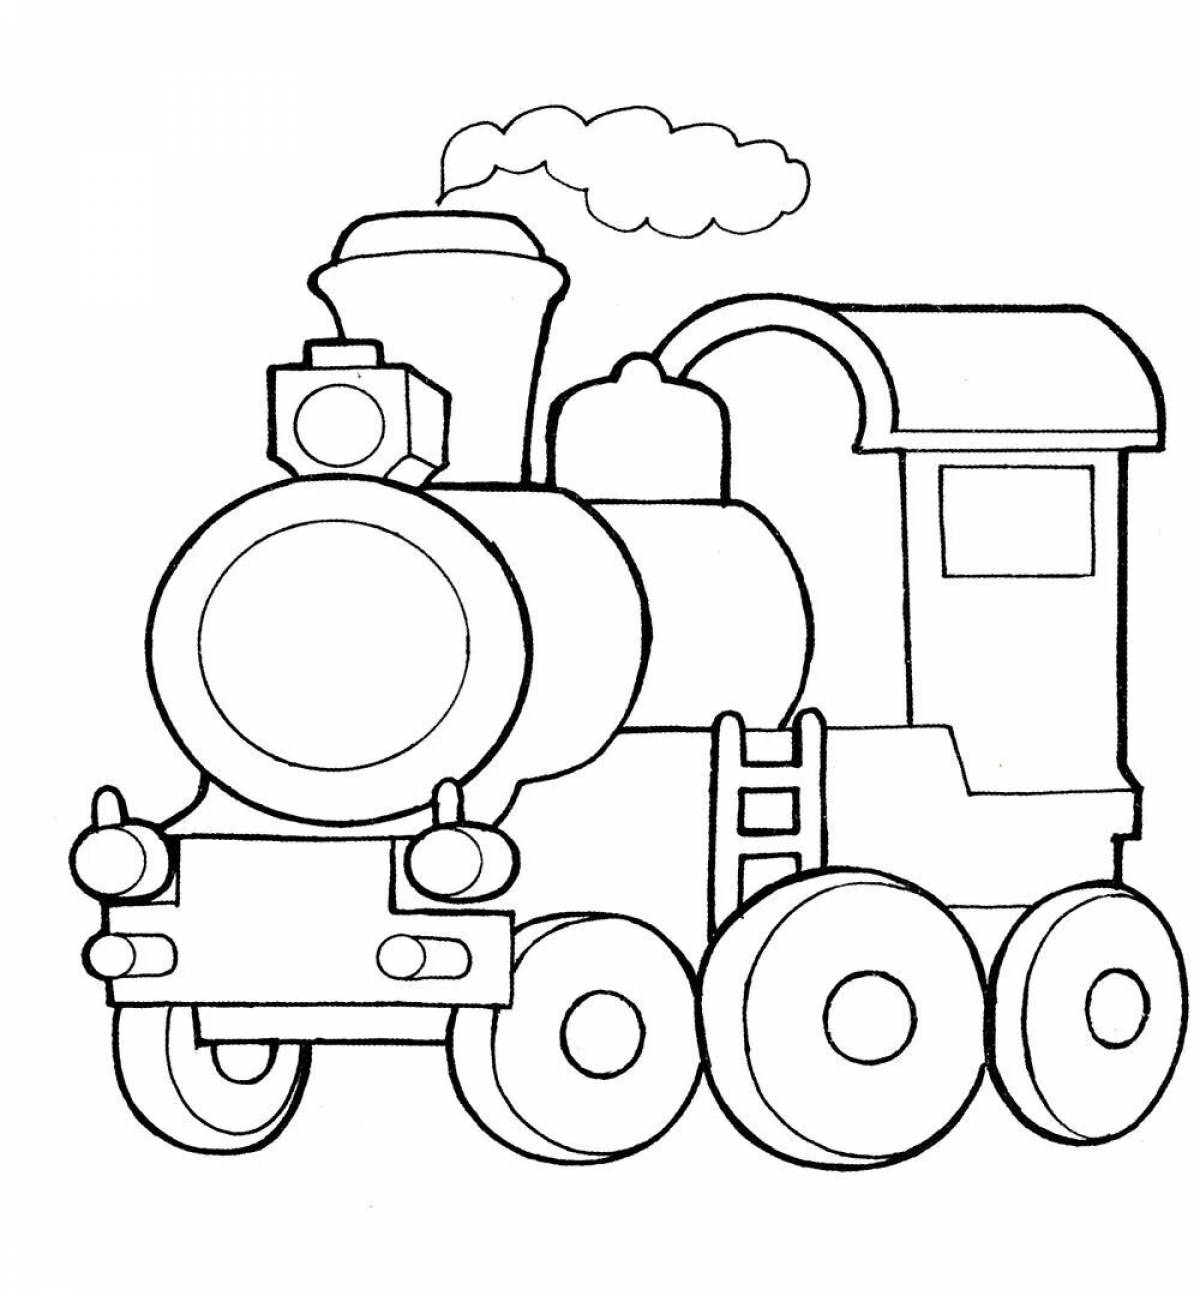 Inspirational train coloring book for 2-3 year olds